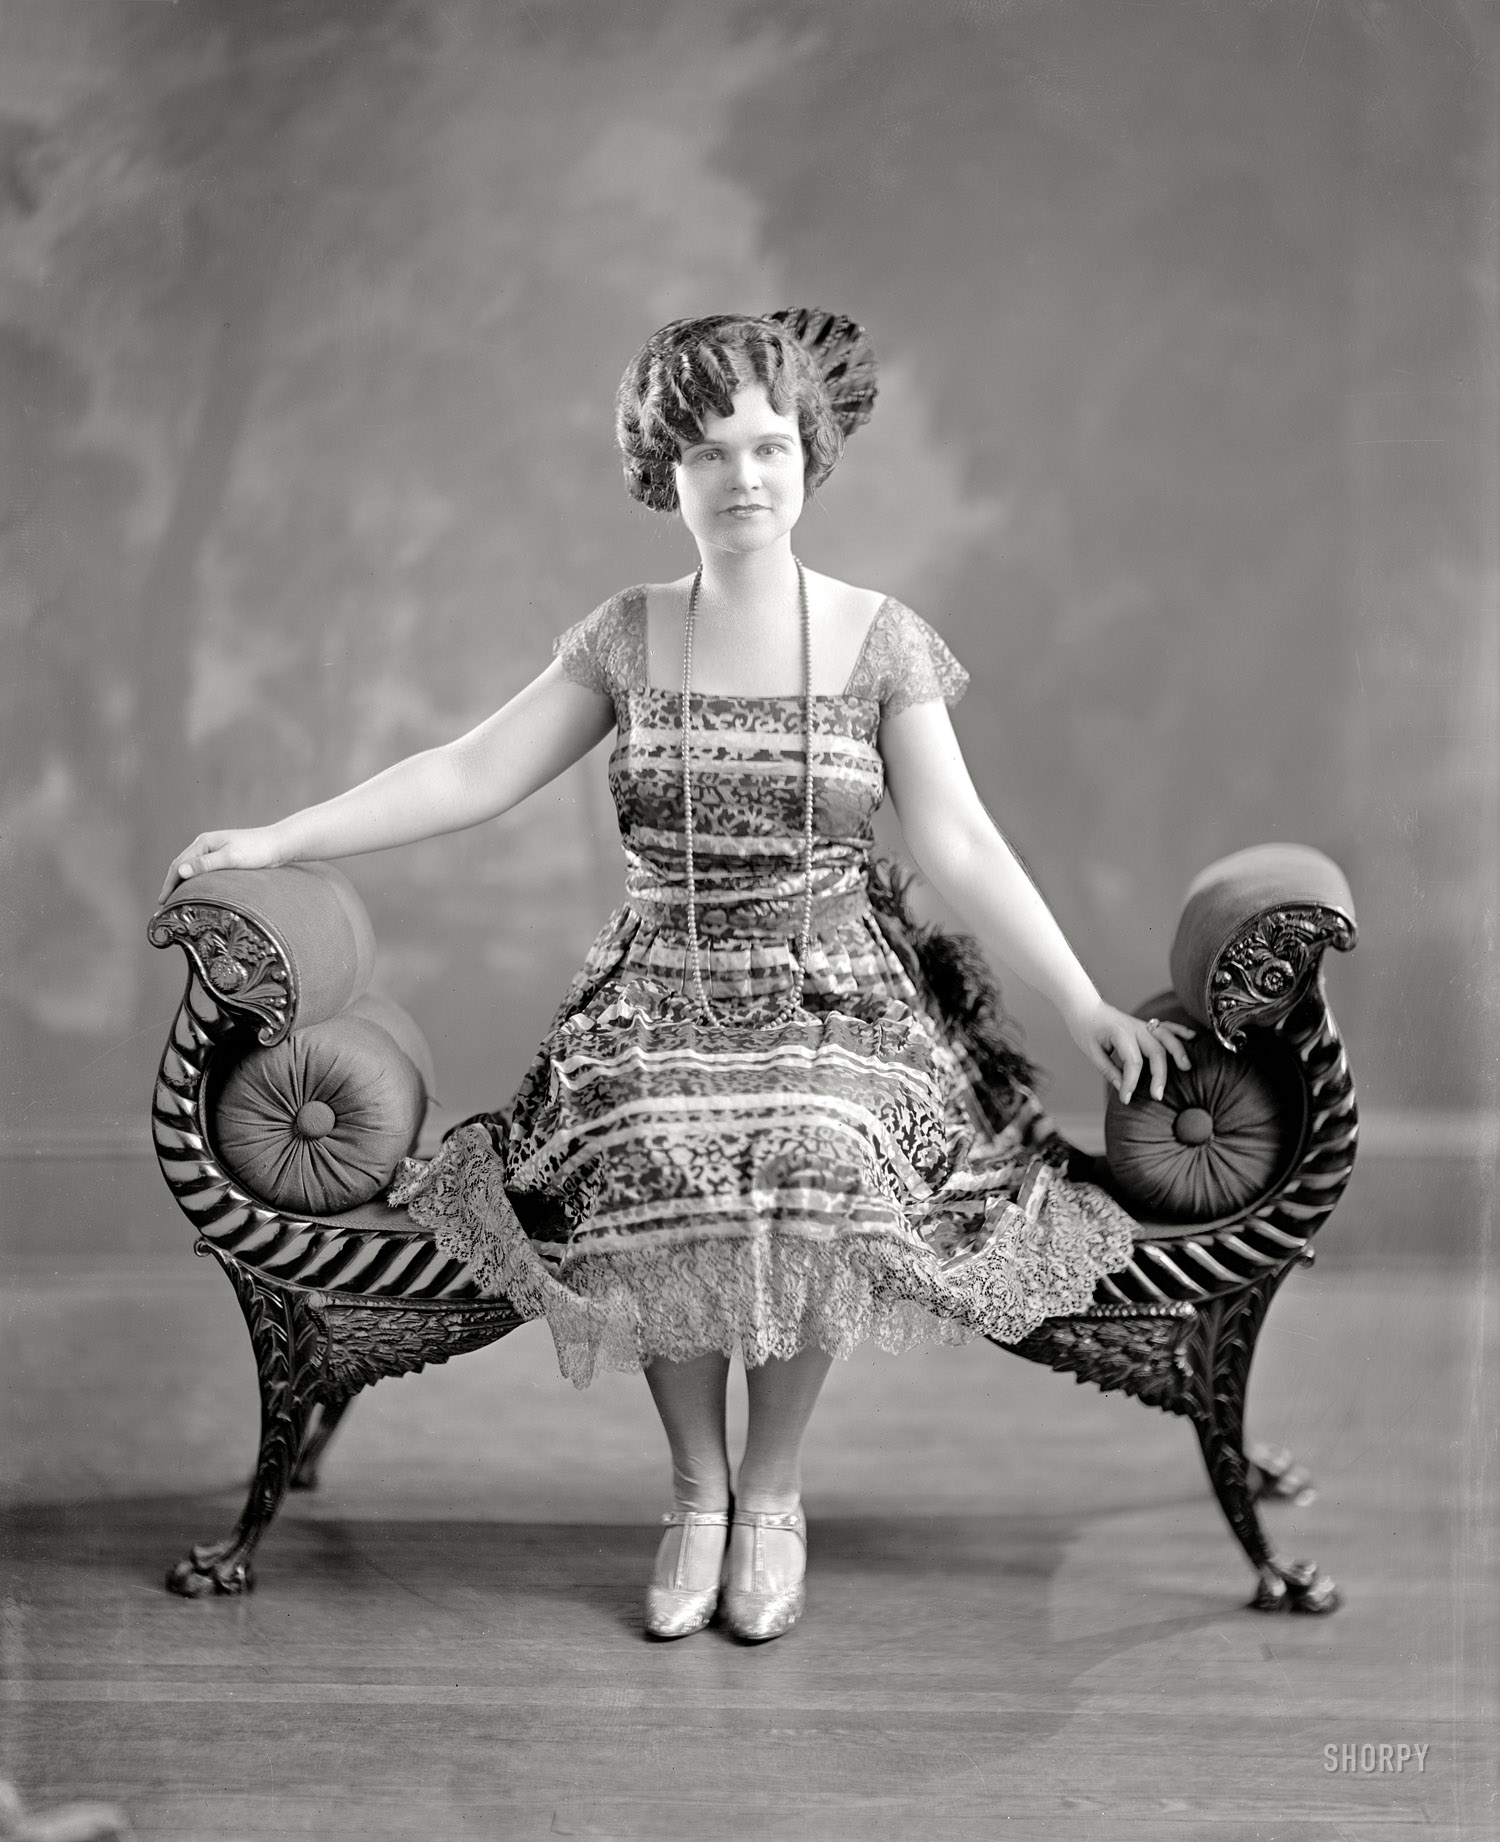 Washington, D.C., circa 1925. "Miss M.K. Little." Wondering, perhaps, if anyone out there in 21st century will remember her. Harris & Ewing. View full size.